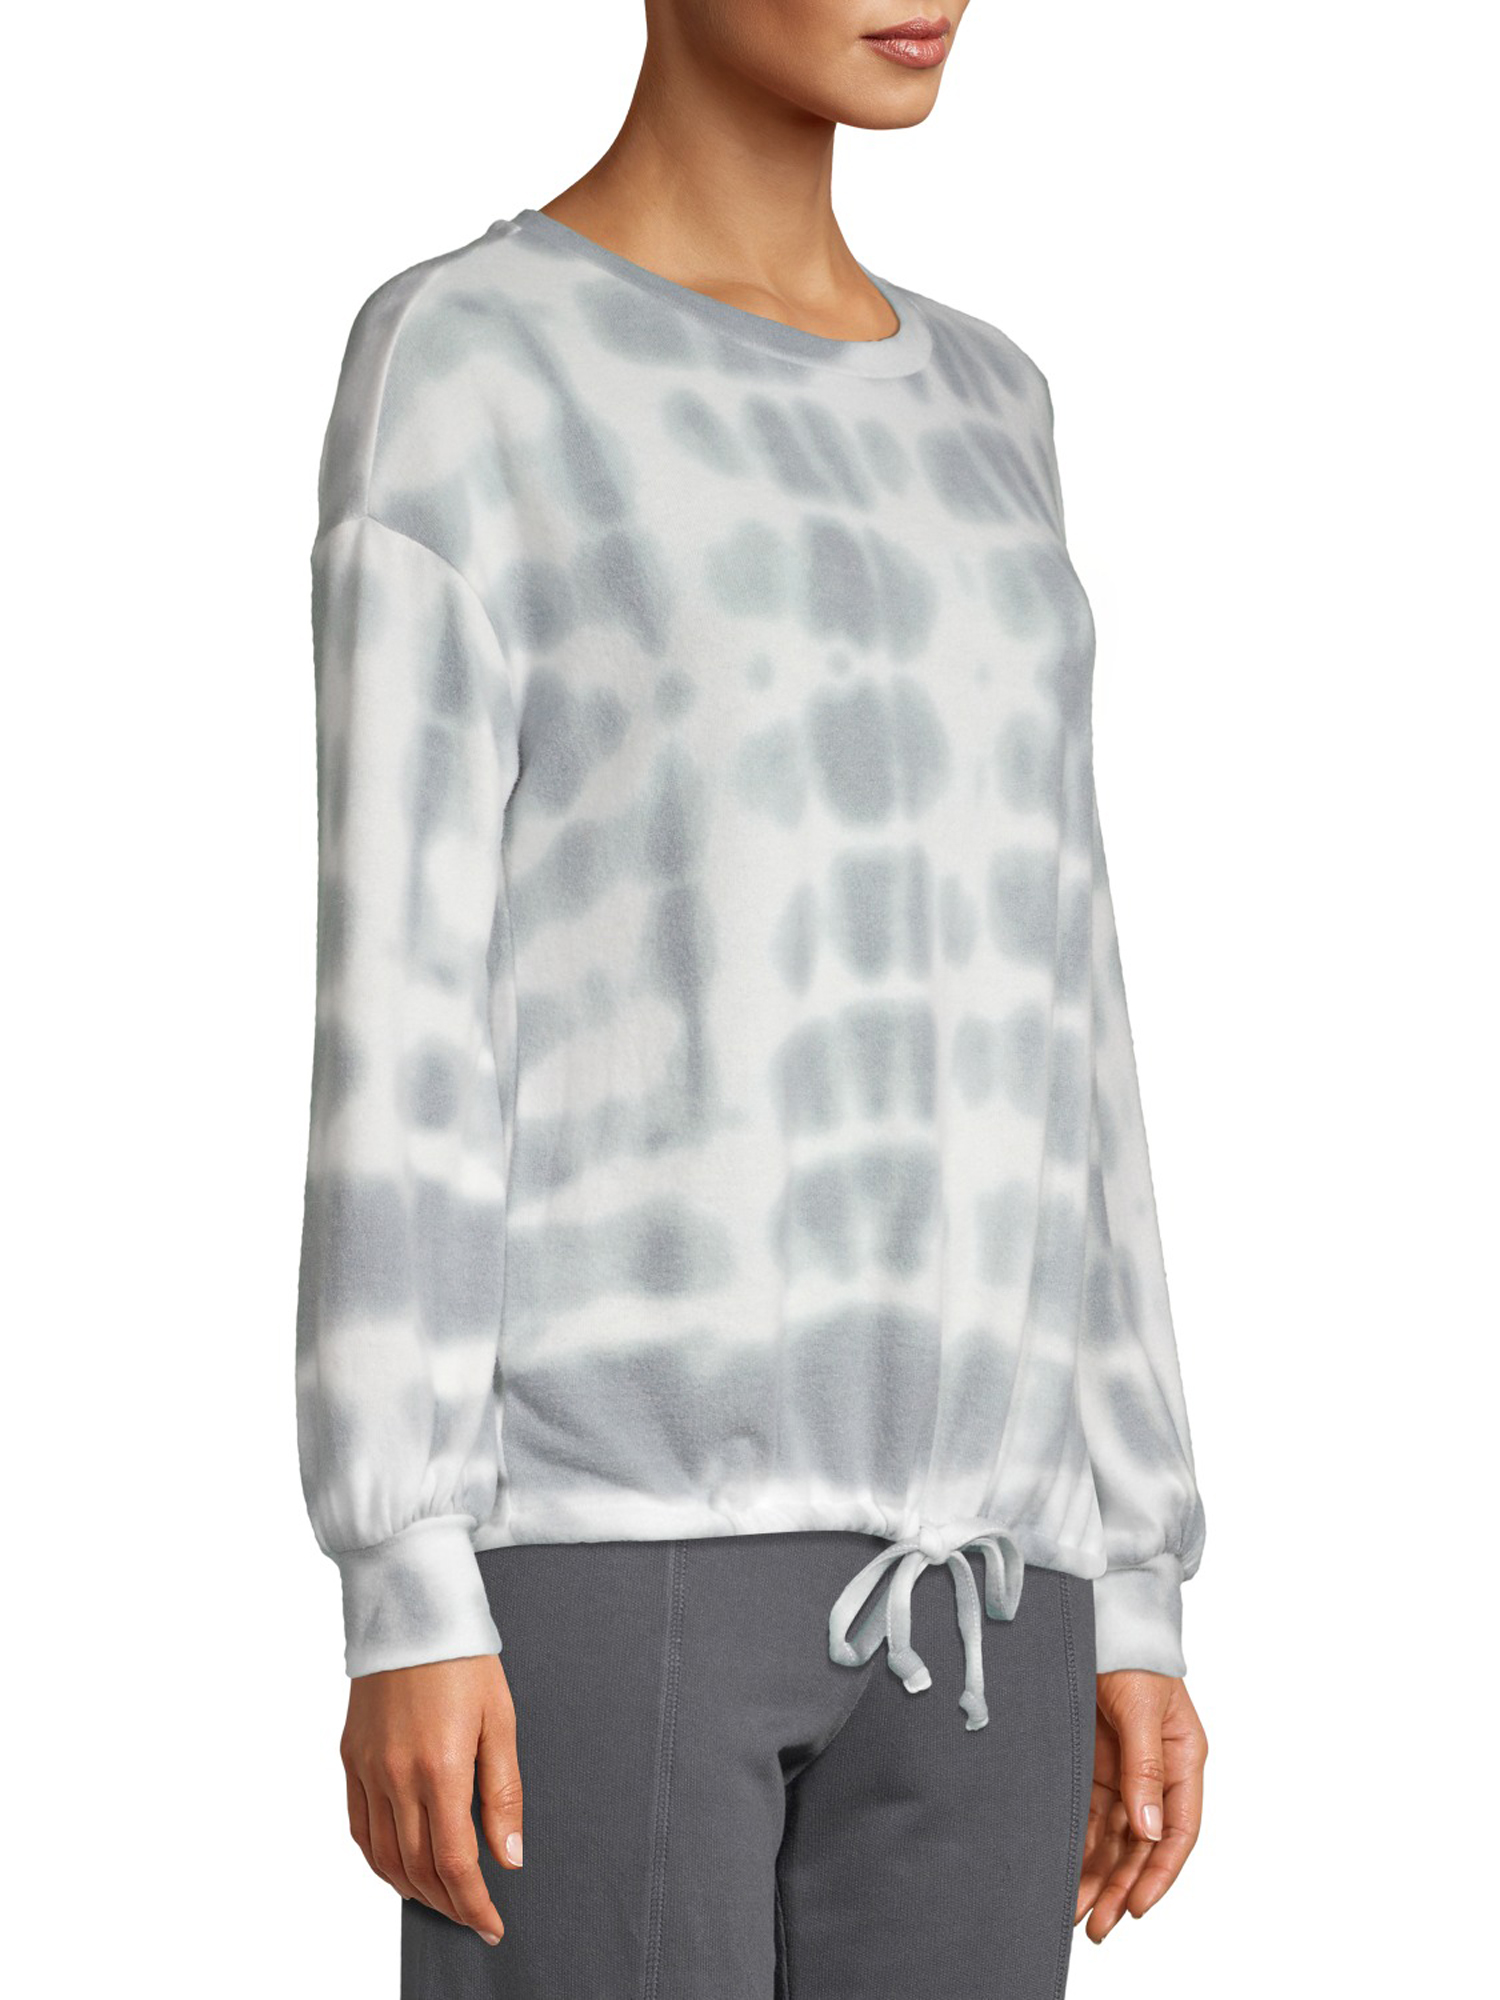 Como Blu Women's Athleisure Hacci Tie Dye Pullover with Drawstring - image 4 of 6